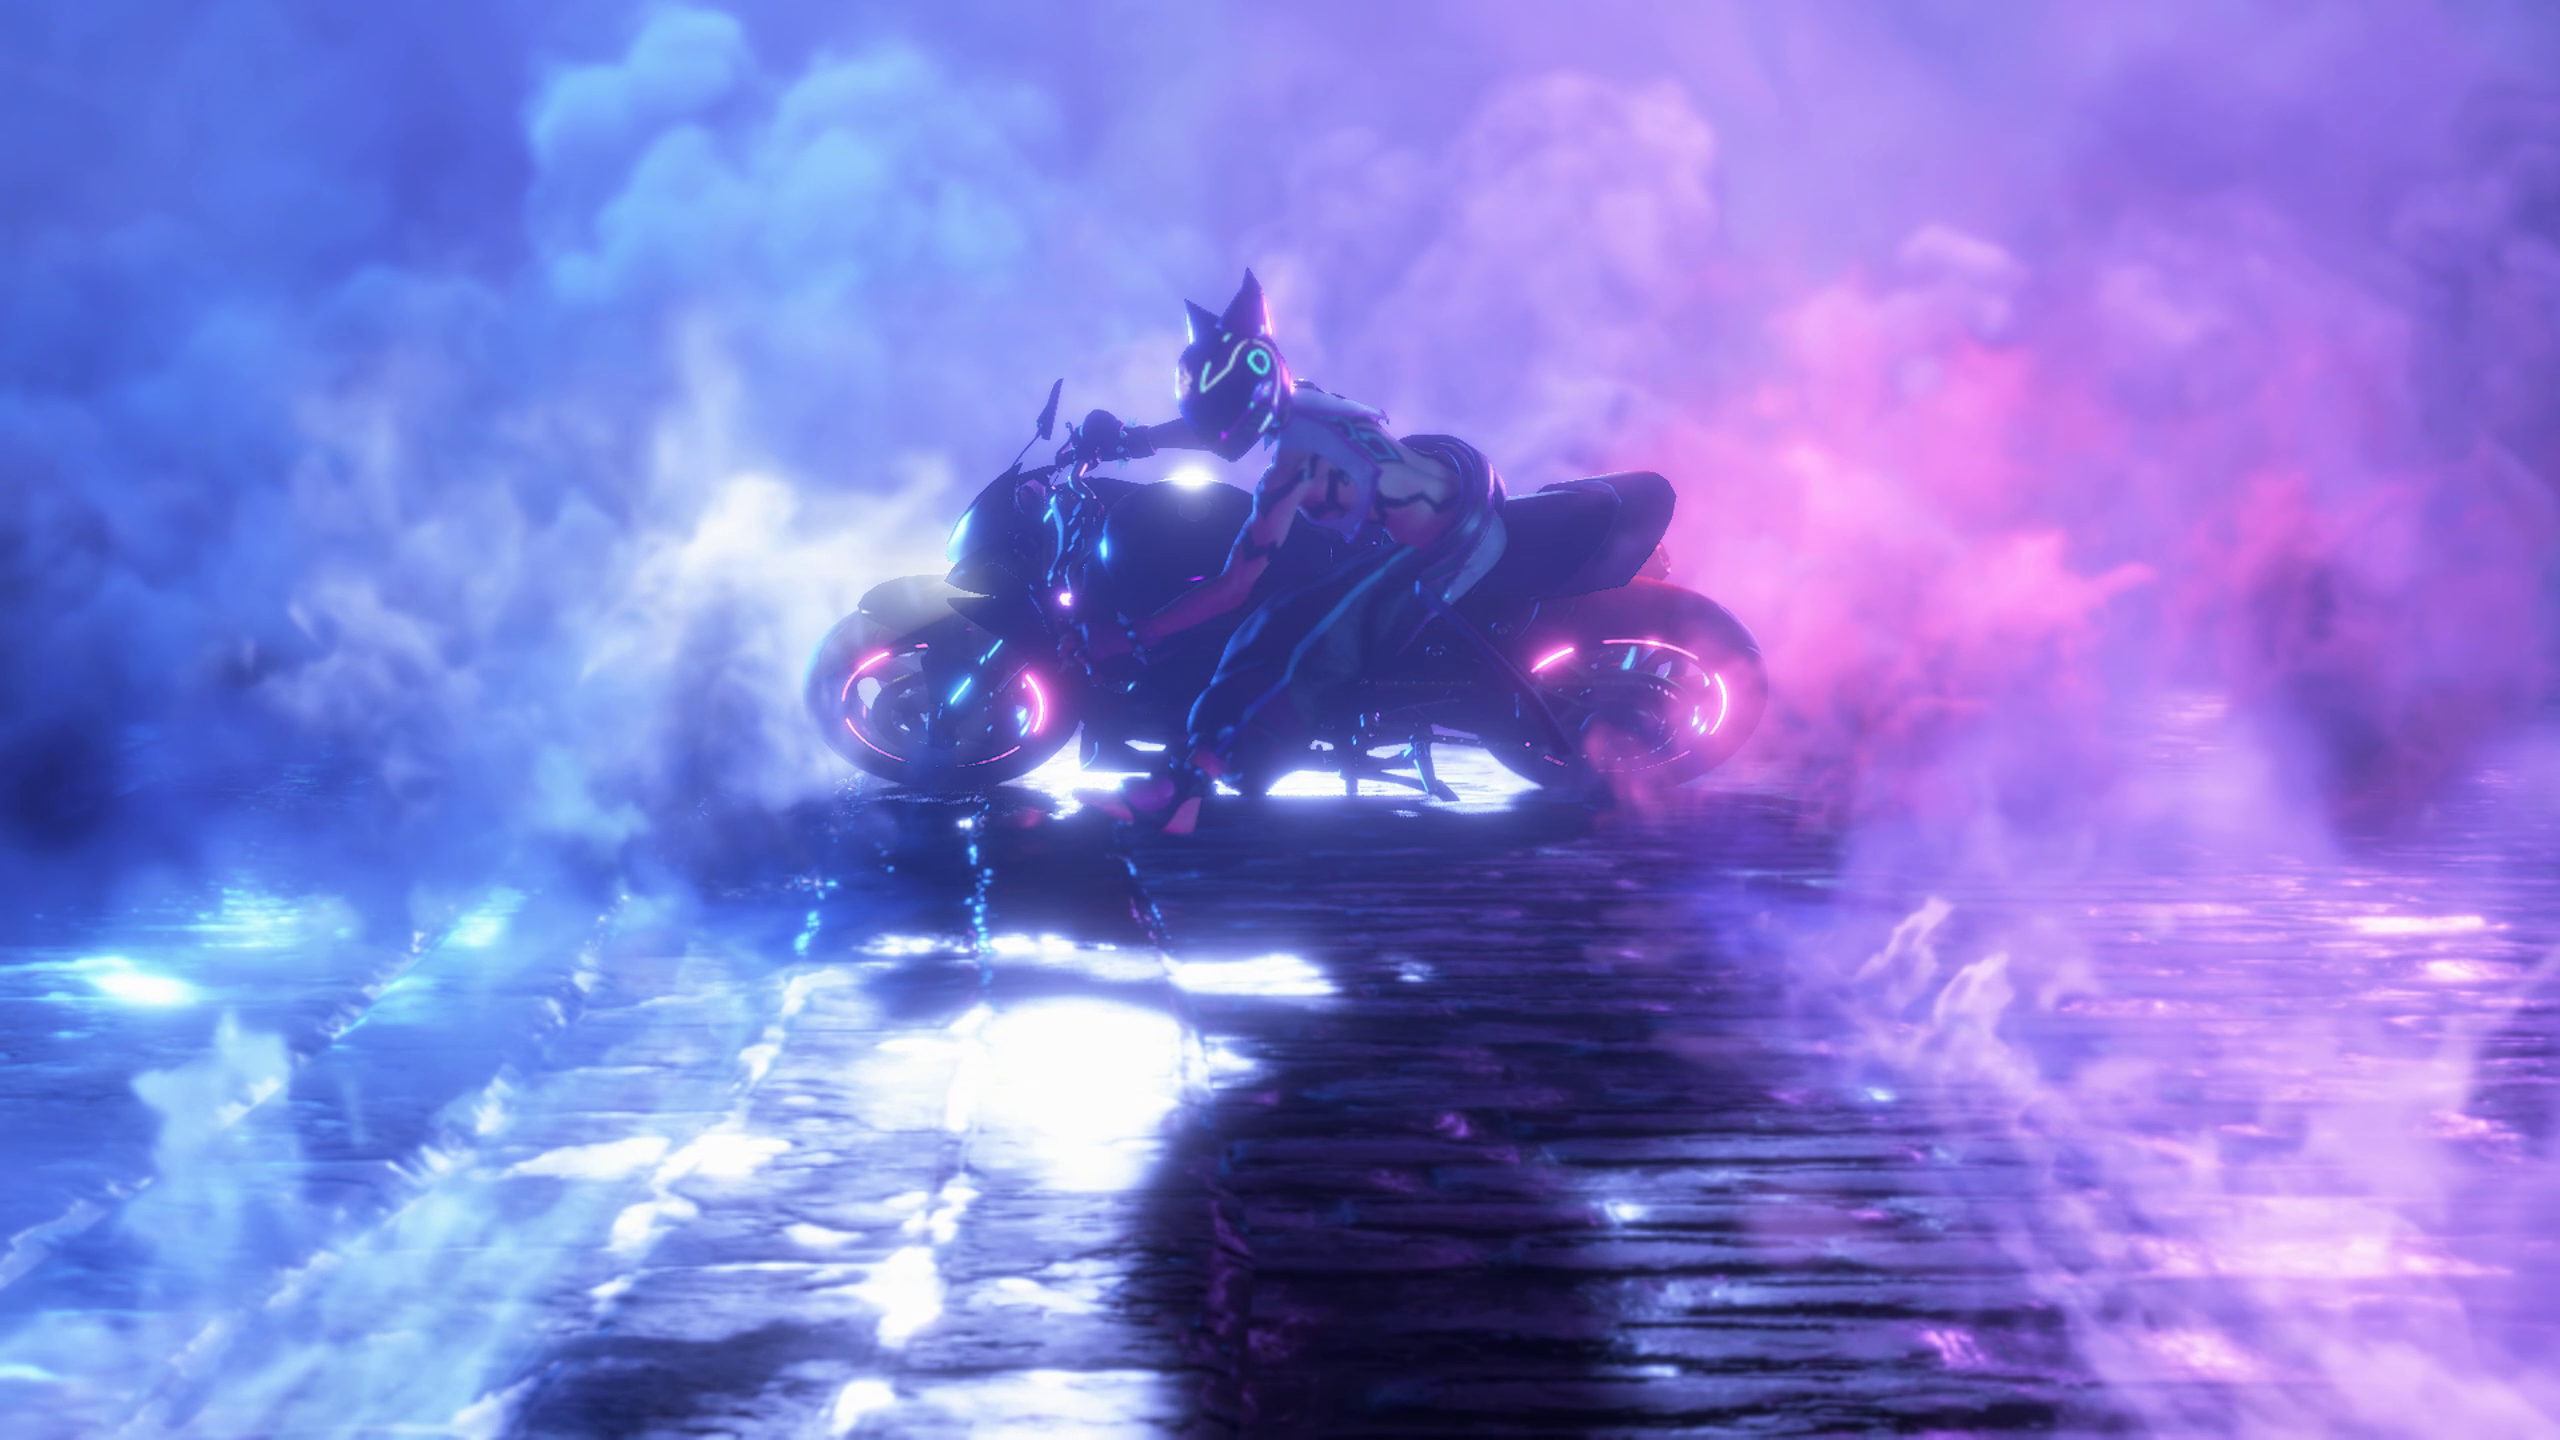 Juri entering on her bike with two colourful smoke plumes behind her.